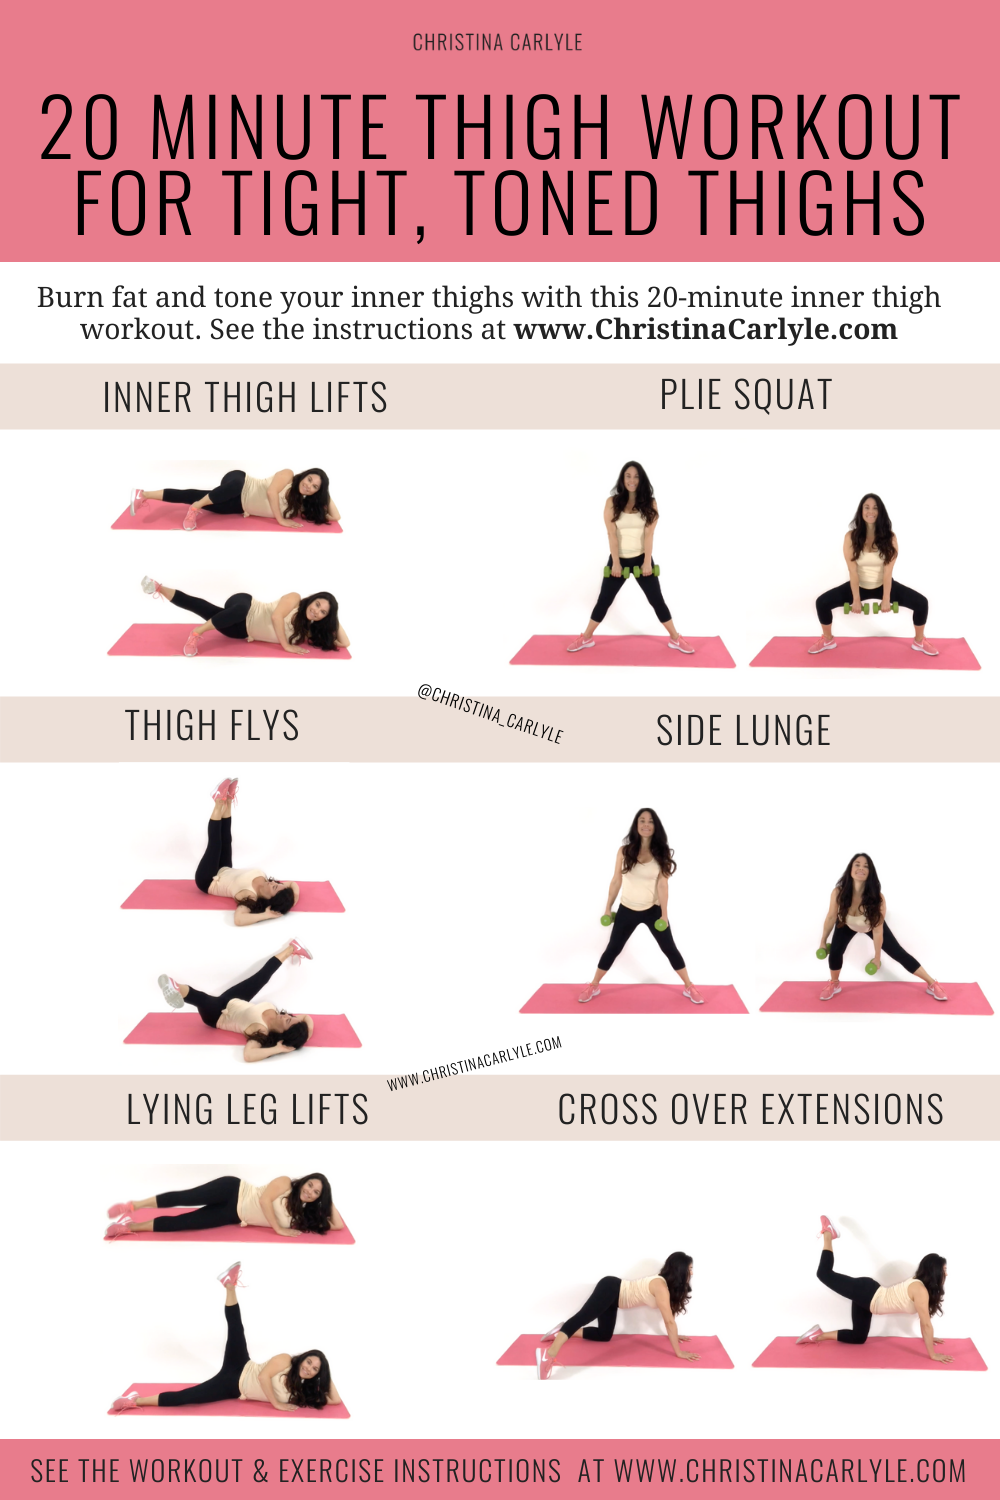 How to Stretch Your Inner Thighs, According to Trainers